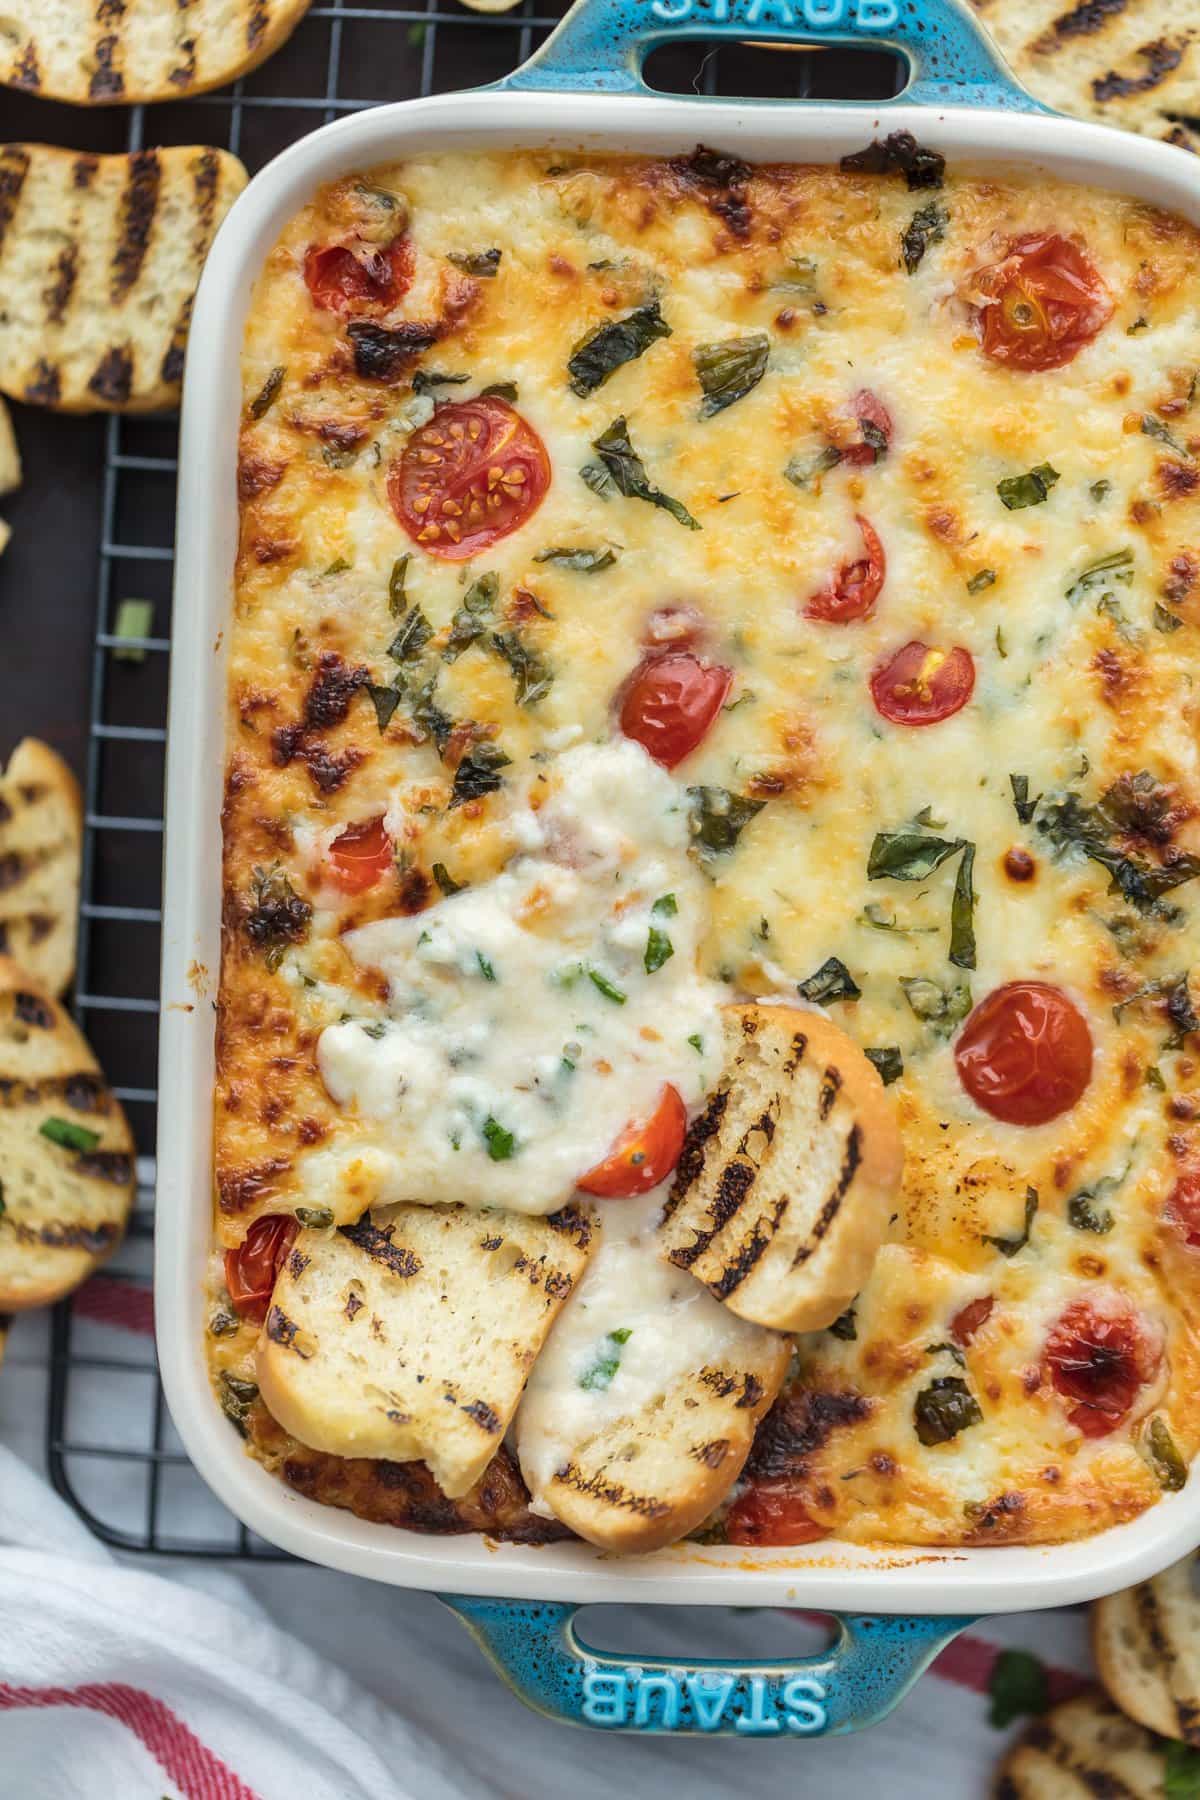 Baked cheese dip with tomatoes, mozzarella, and basil